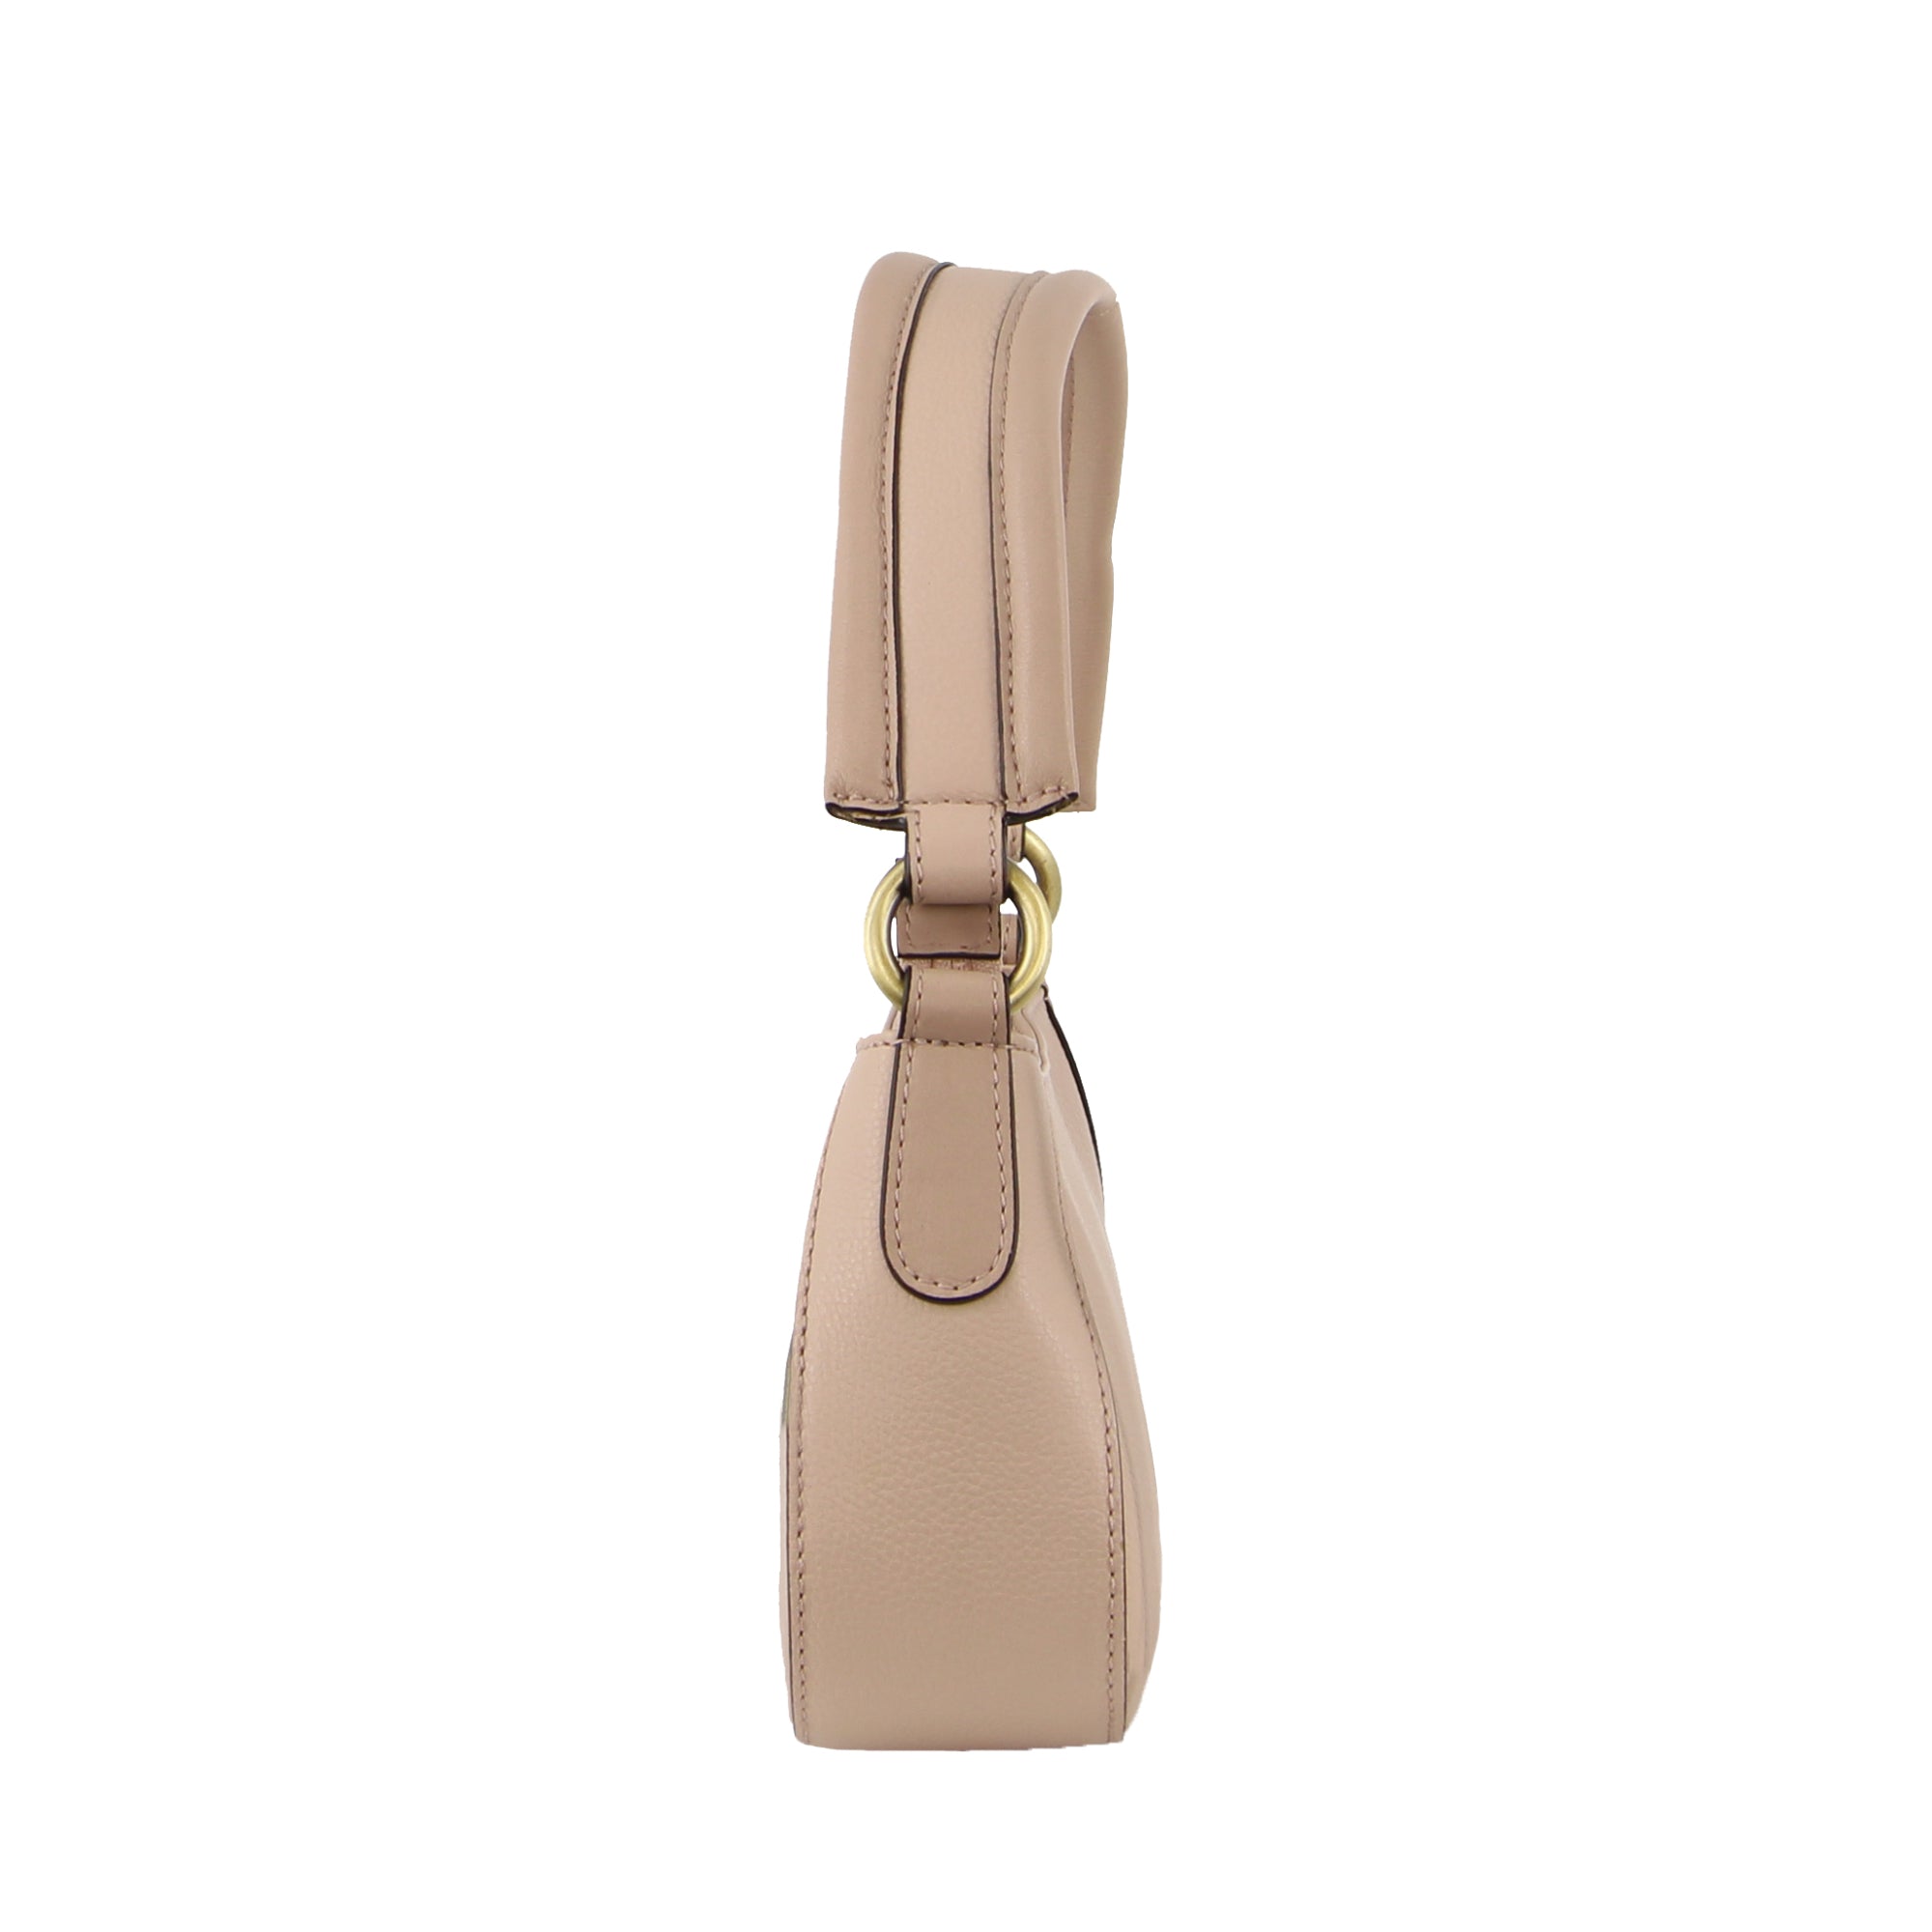 Pierre Cardin Ladies Leather Flap Over Bag in Nude